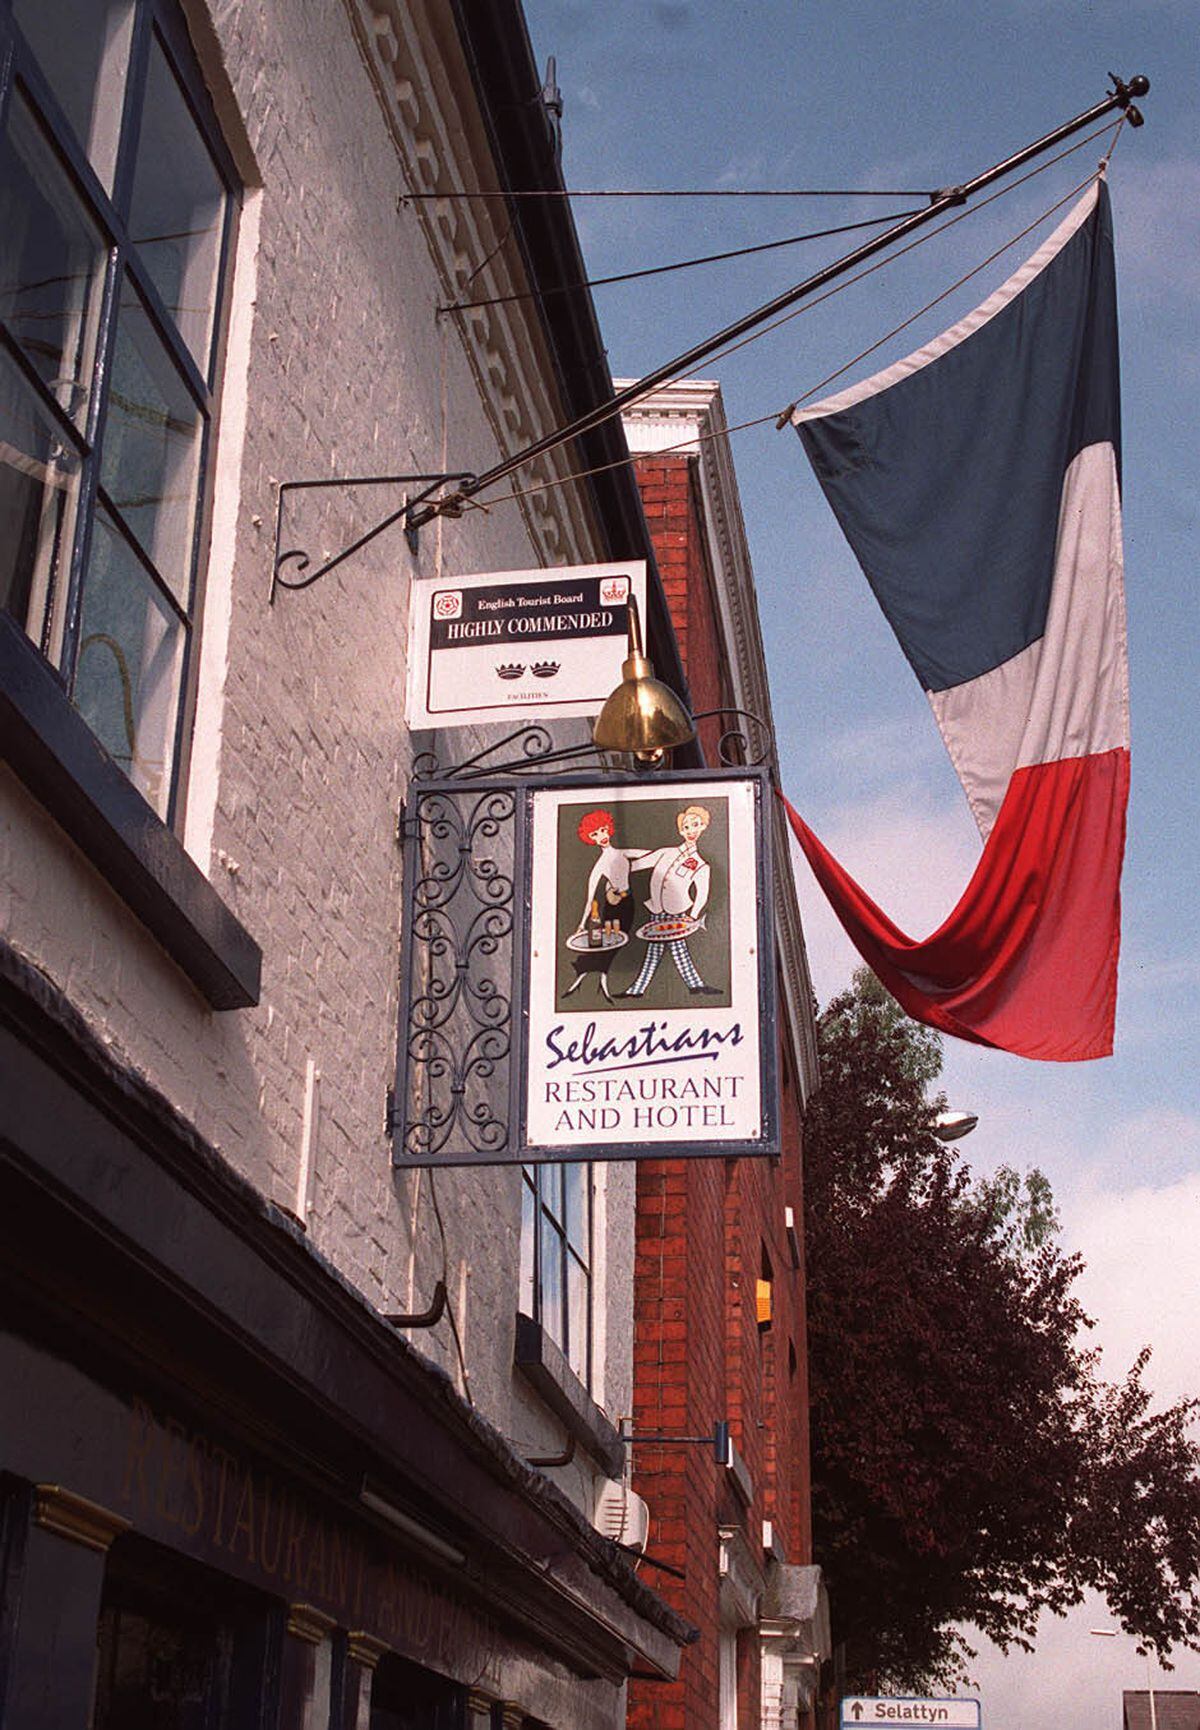 Sebastians Restaurant With Rooms, in Oswestry